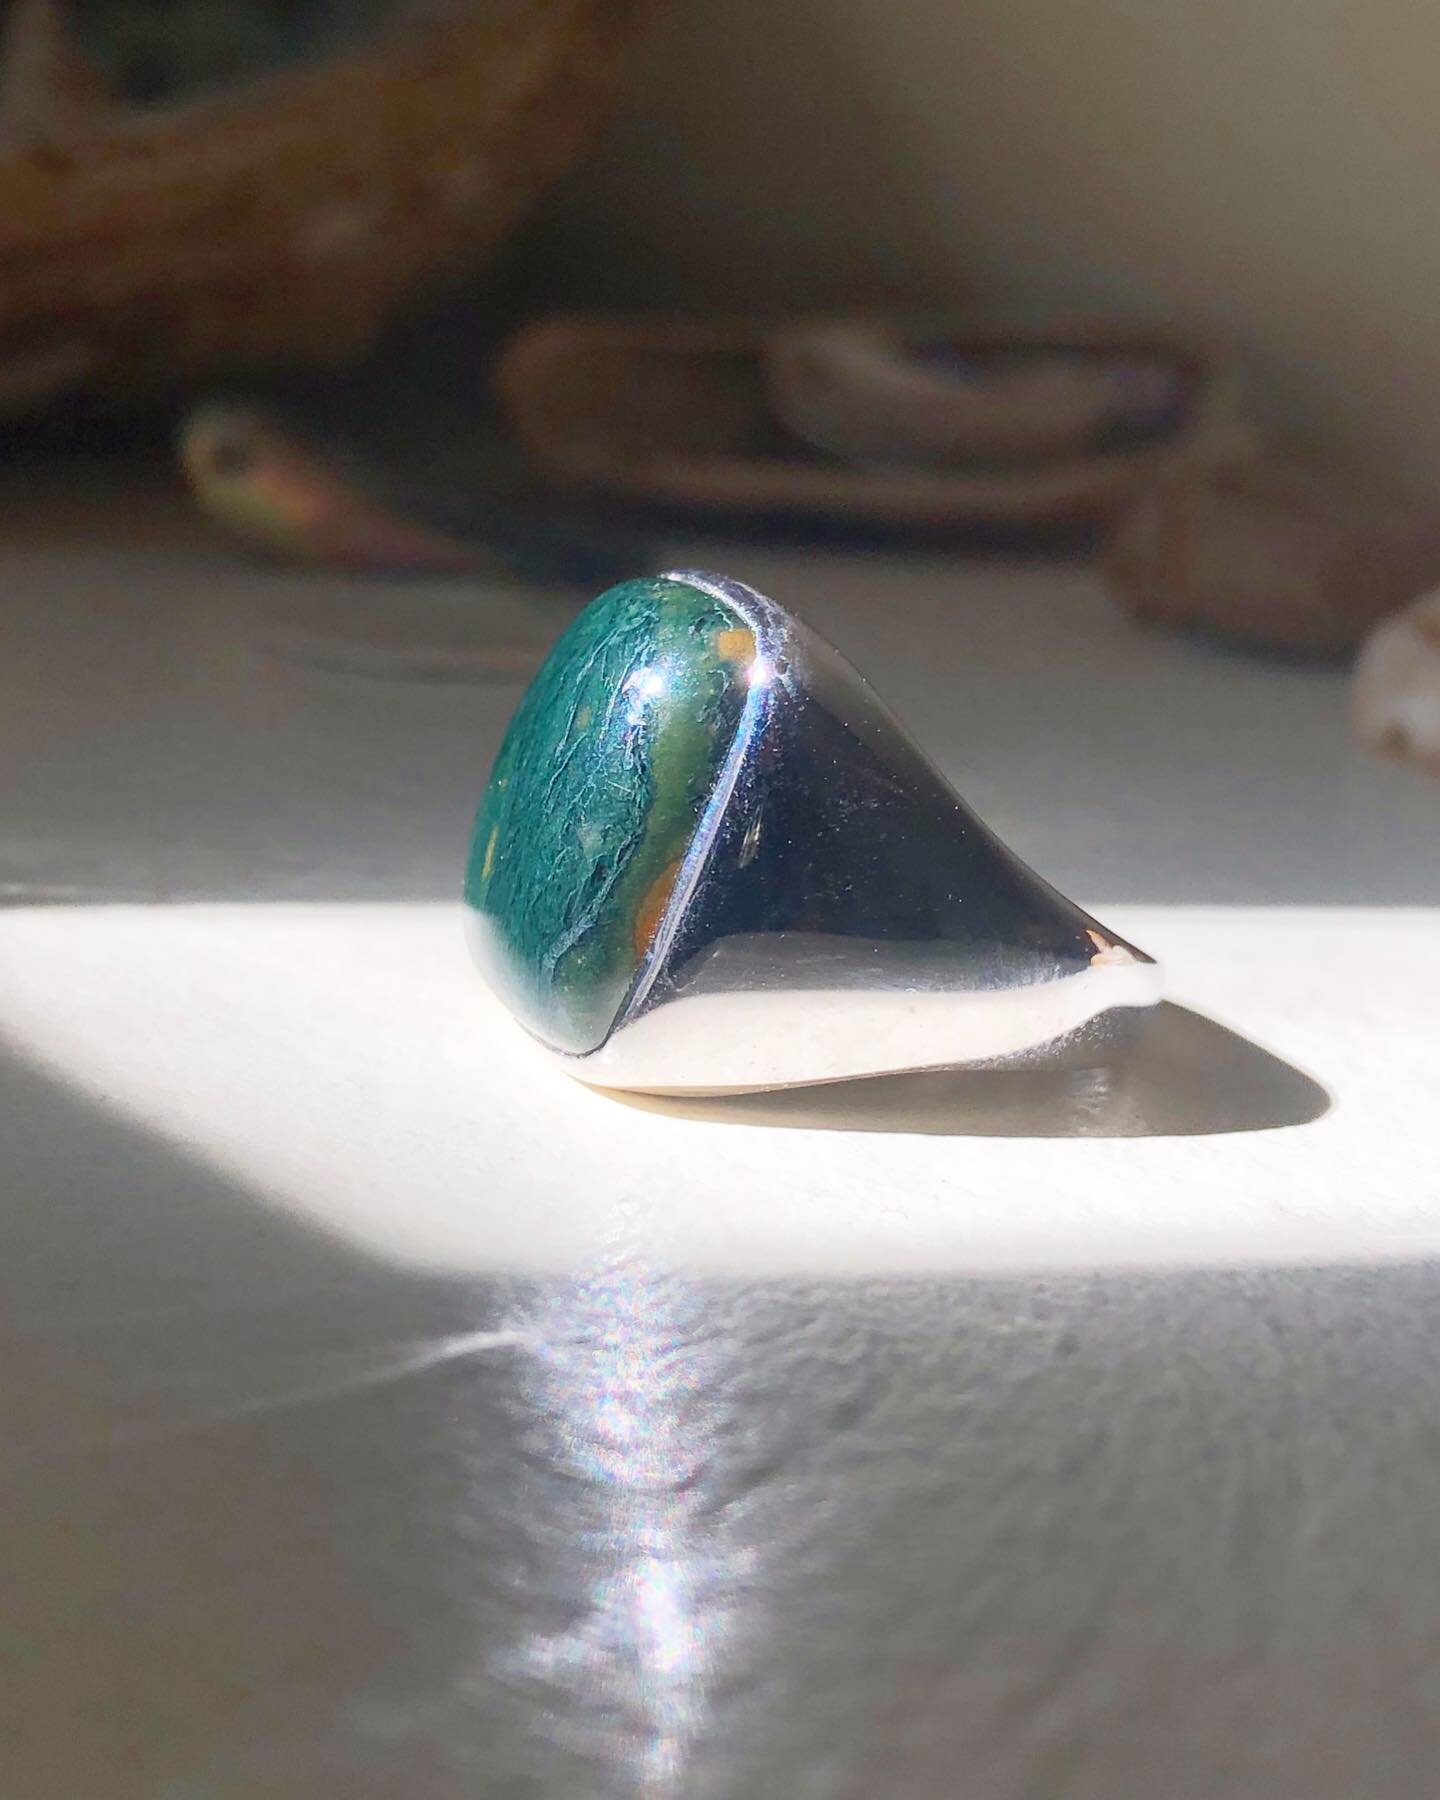 Carved &amp; set this custom Bloodstone Signet Ring several years back. Just like all the magical pieces I&rsquo;ve made, this was a special one! I sourced the bloodstone and got it custom cut to fit the desired shape. It was my first time wax carvin